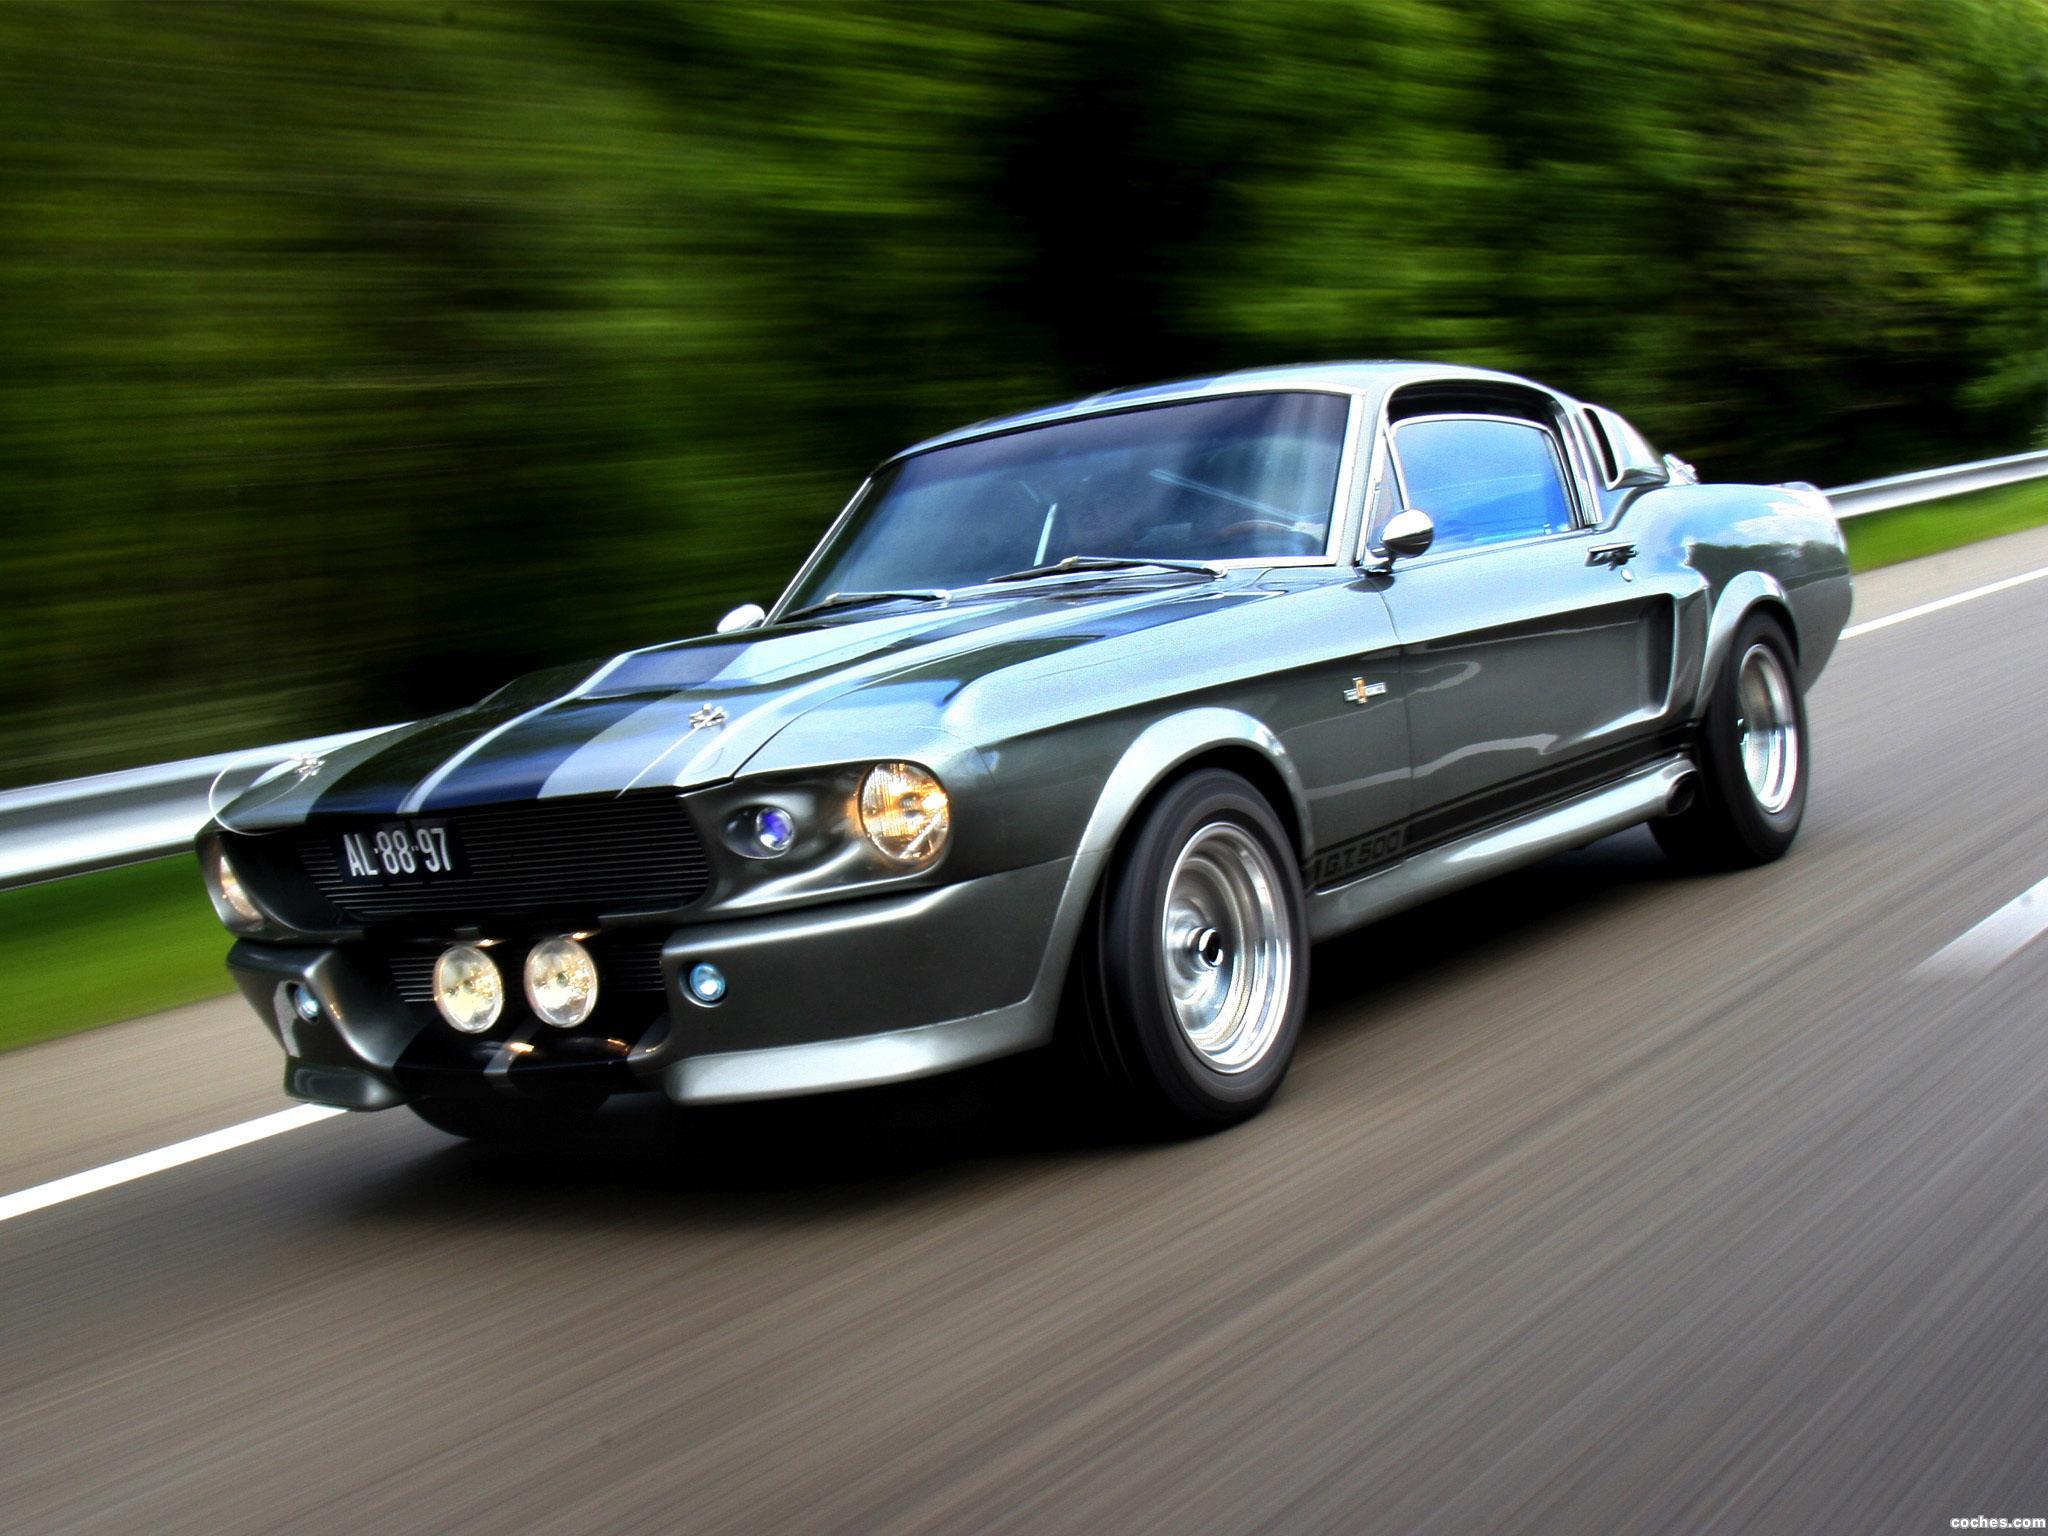 www.coches.com/fotos_historicas/shelby/Ford-Mustang-GT500-Eleanor/shelby_ford-mustang-gt500-eleanor-2000_r5.jpg